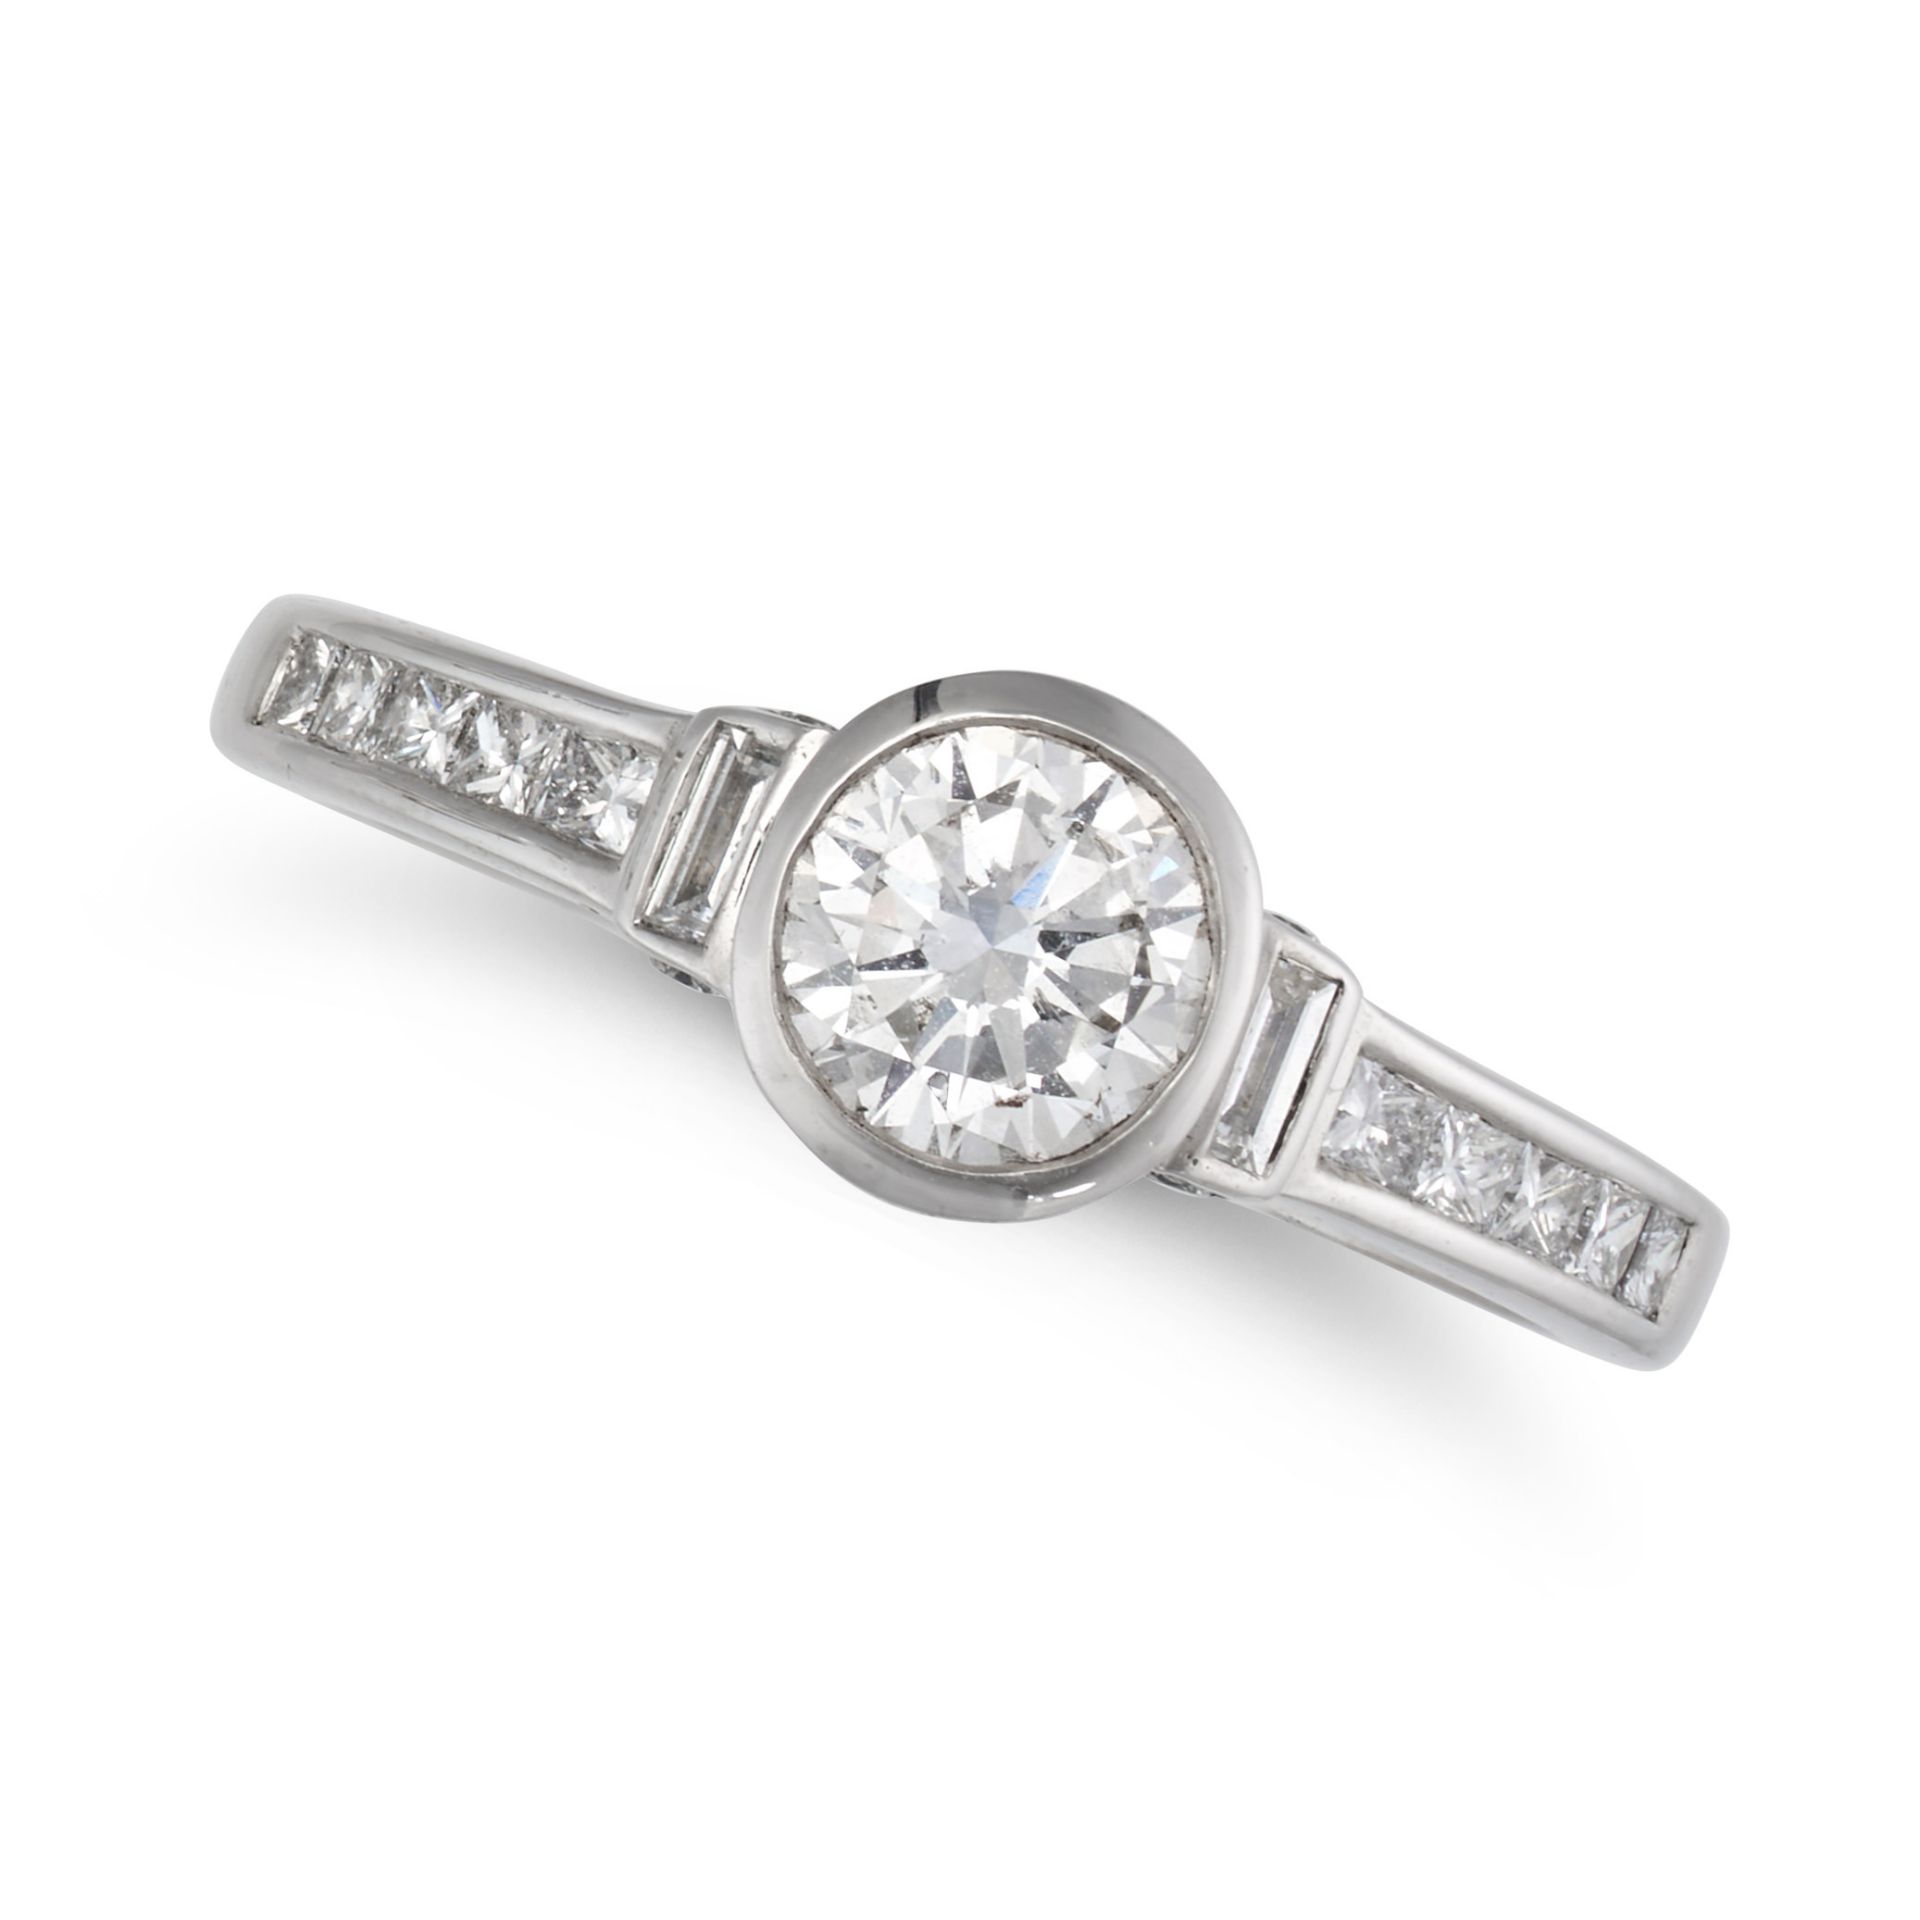 NO RESERVE - A SOLITAIRE DIAMOND RING in 18ct white gold, set with a round brilliant cut diamond ...